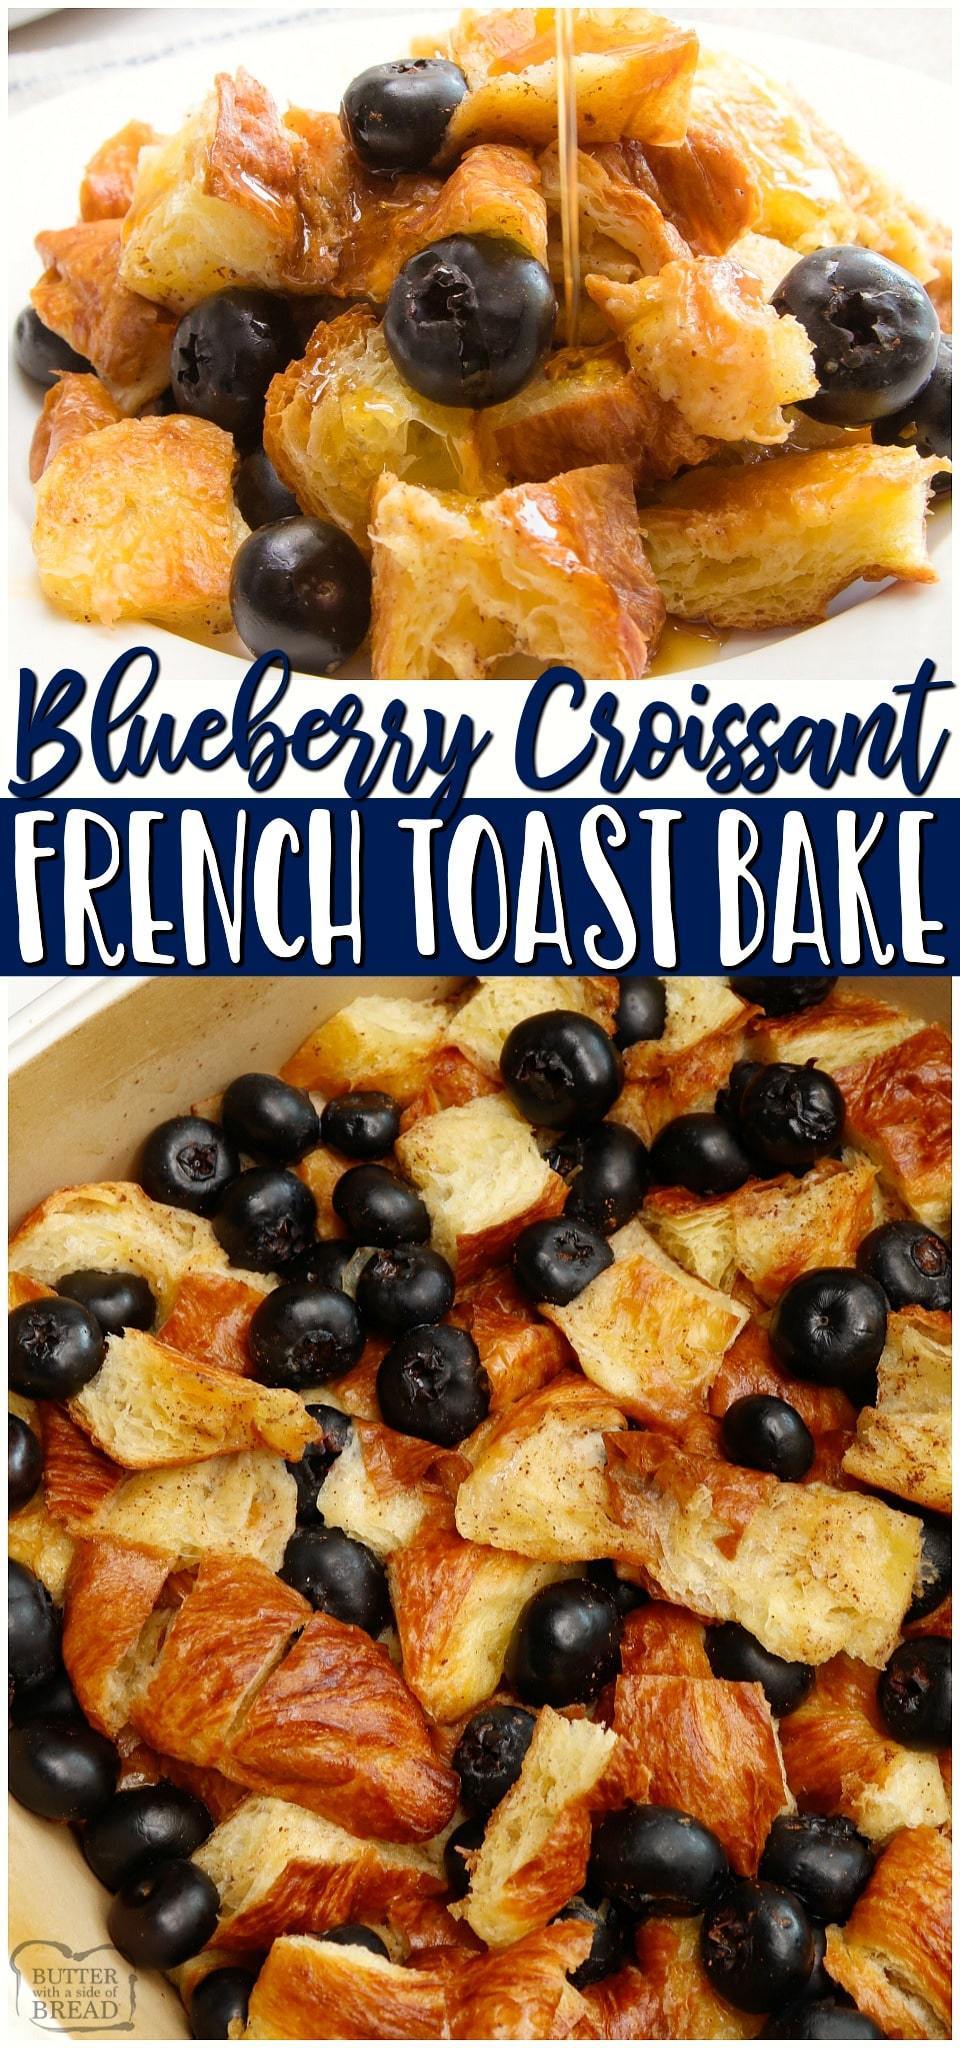 Blueberry Croissant French Toast Bake is a buttery, fluffy, and flavorful breakfast recipe. With 5 ingredients & a few simple steps, you can have an Easy Croissant French Toast Casserole in no time!